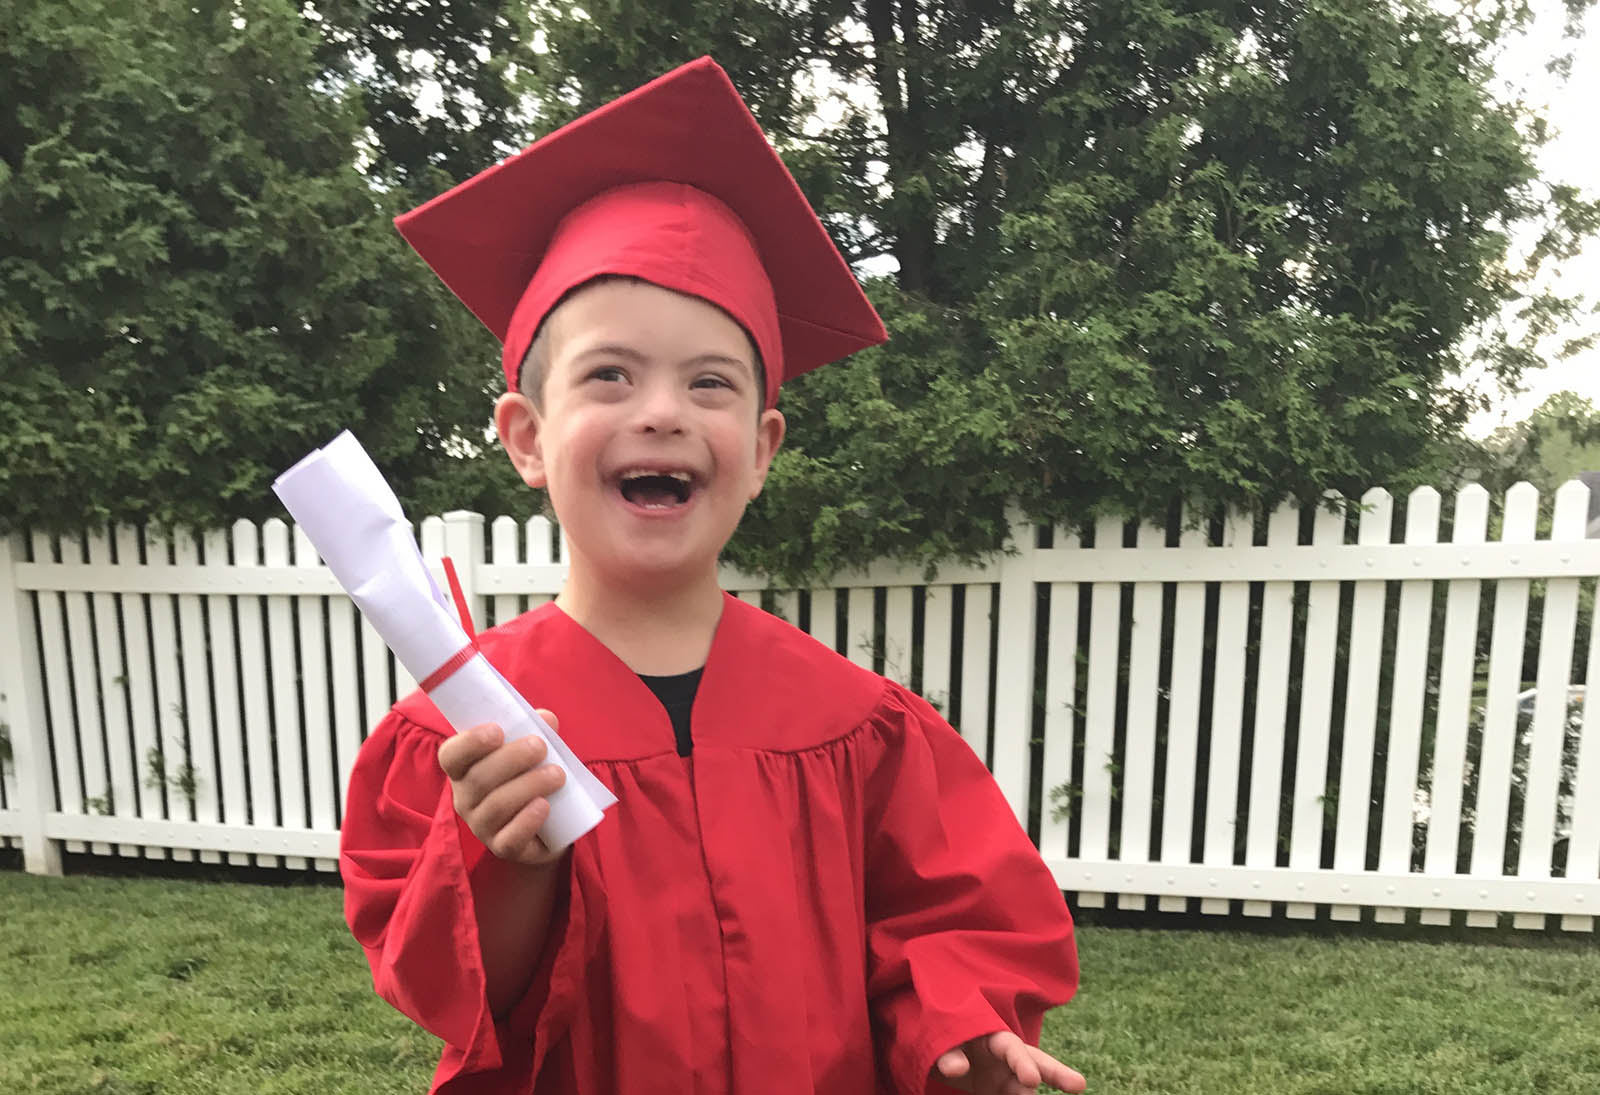 Child celebrating in a graduation gown